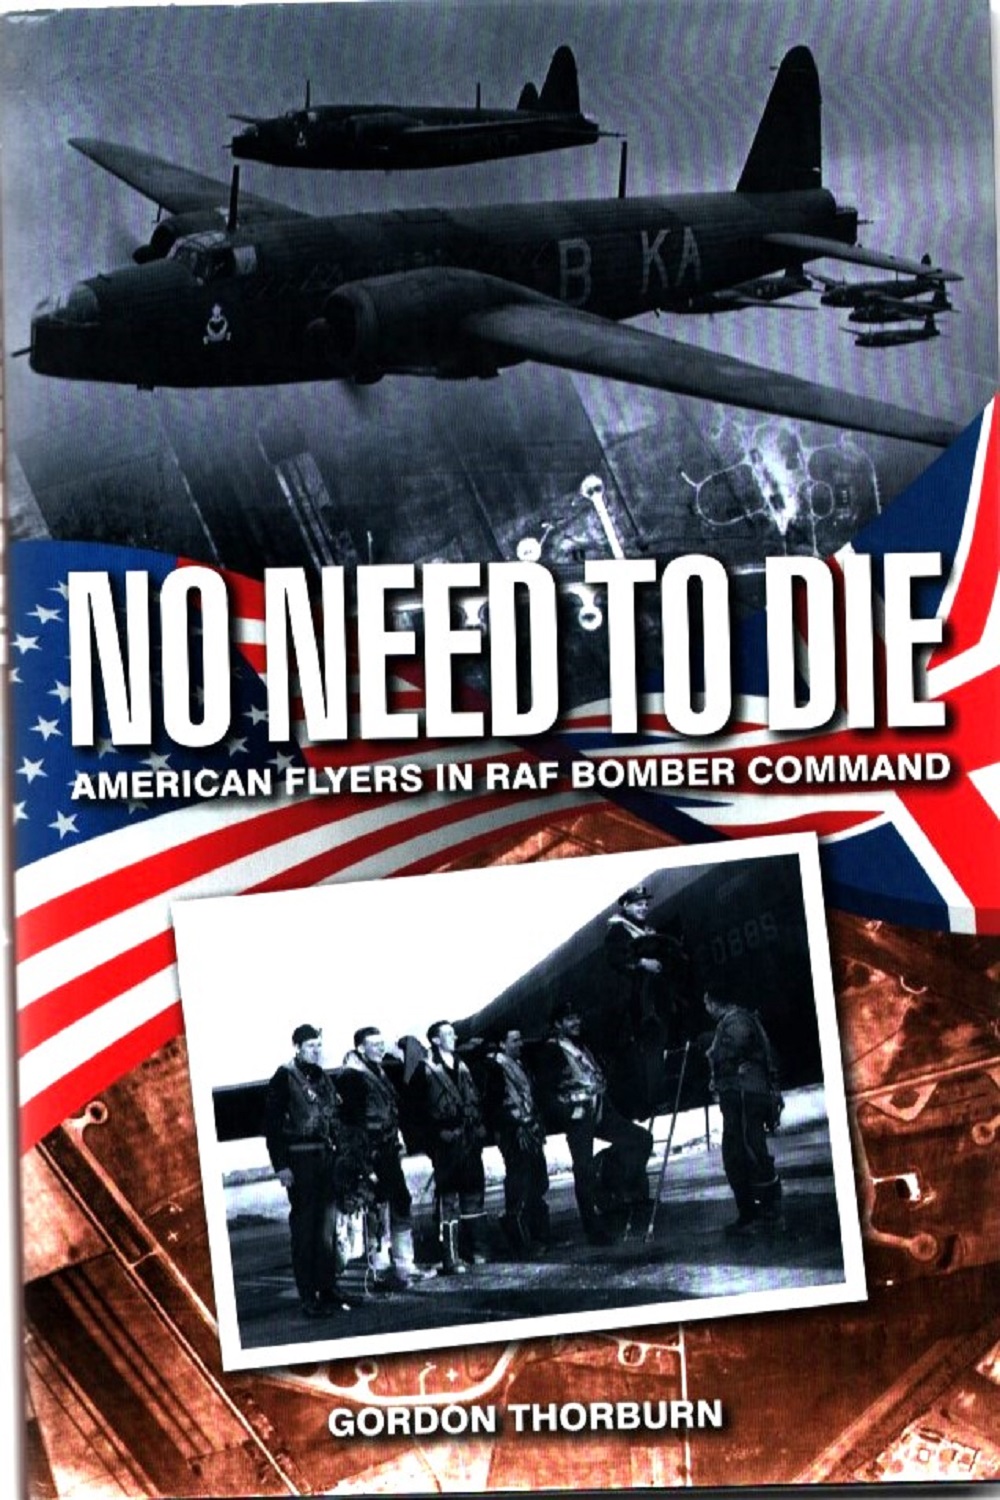 No Need to Die: American Flyers in RAF Bomber Command by Gordon Thorburn, Signed by 8 Veterans - Image 2 of 3